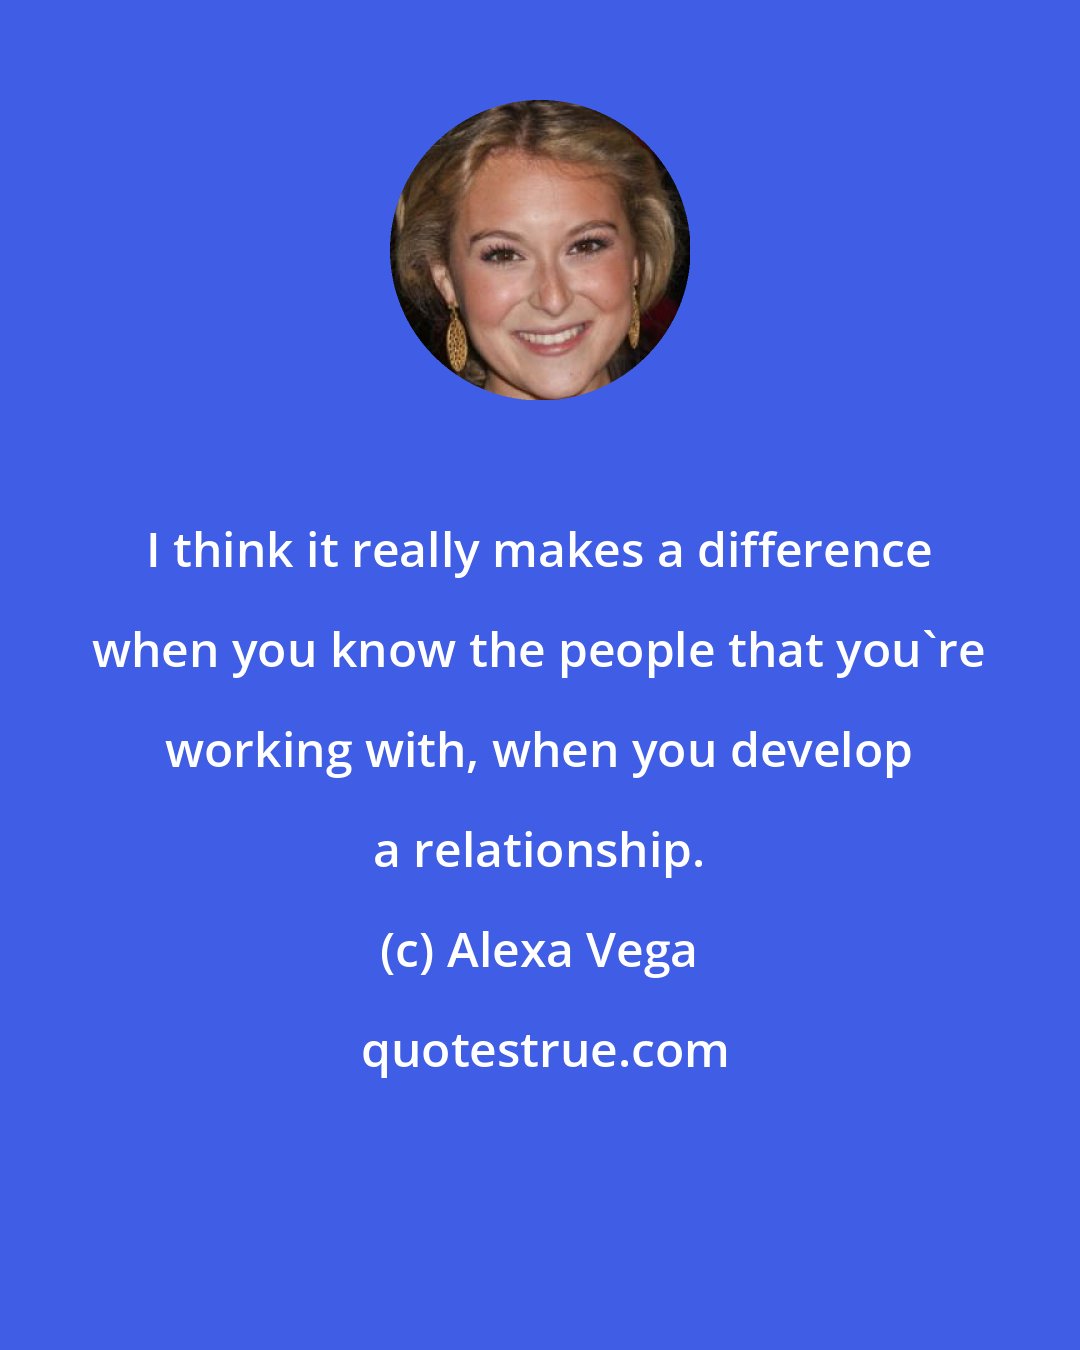 Alexa Vega: I think it really makes a difference when you know the people that you're working with, when you develop a relationship.